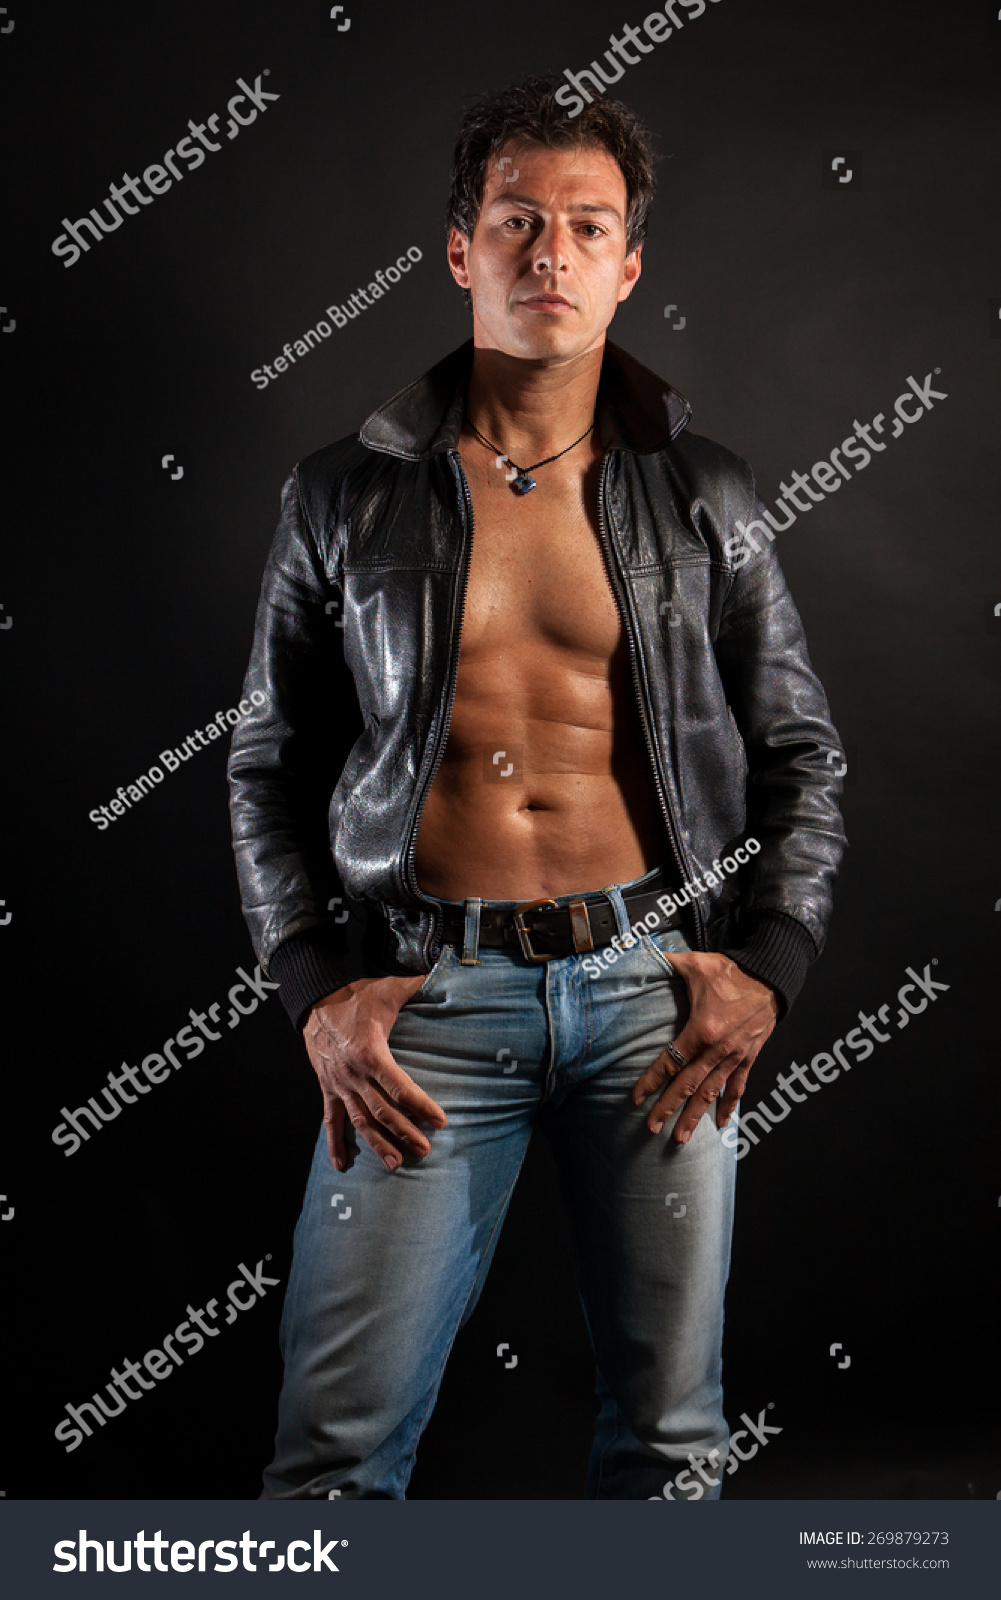 Attractive Man In Leather Jacket And Jeans Posing Shirtless In Studio ...